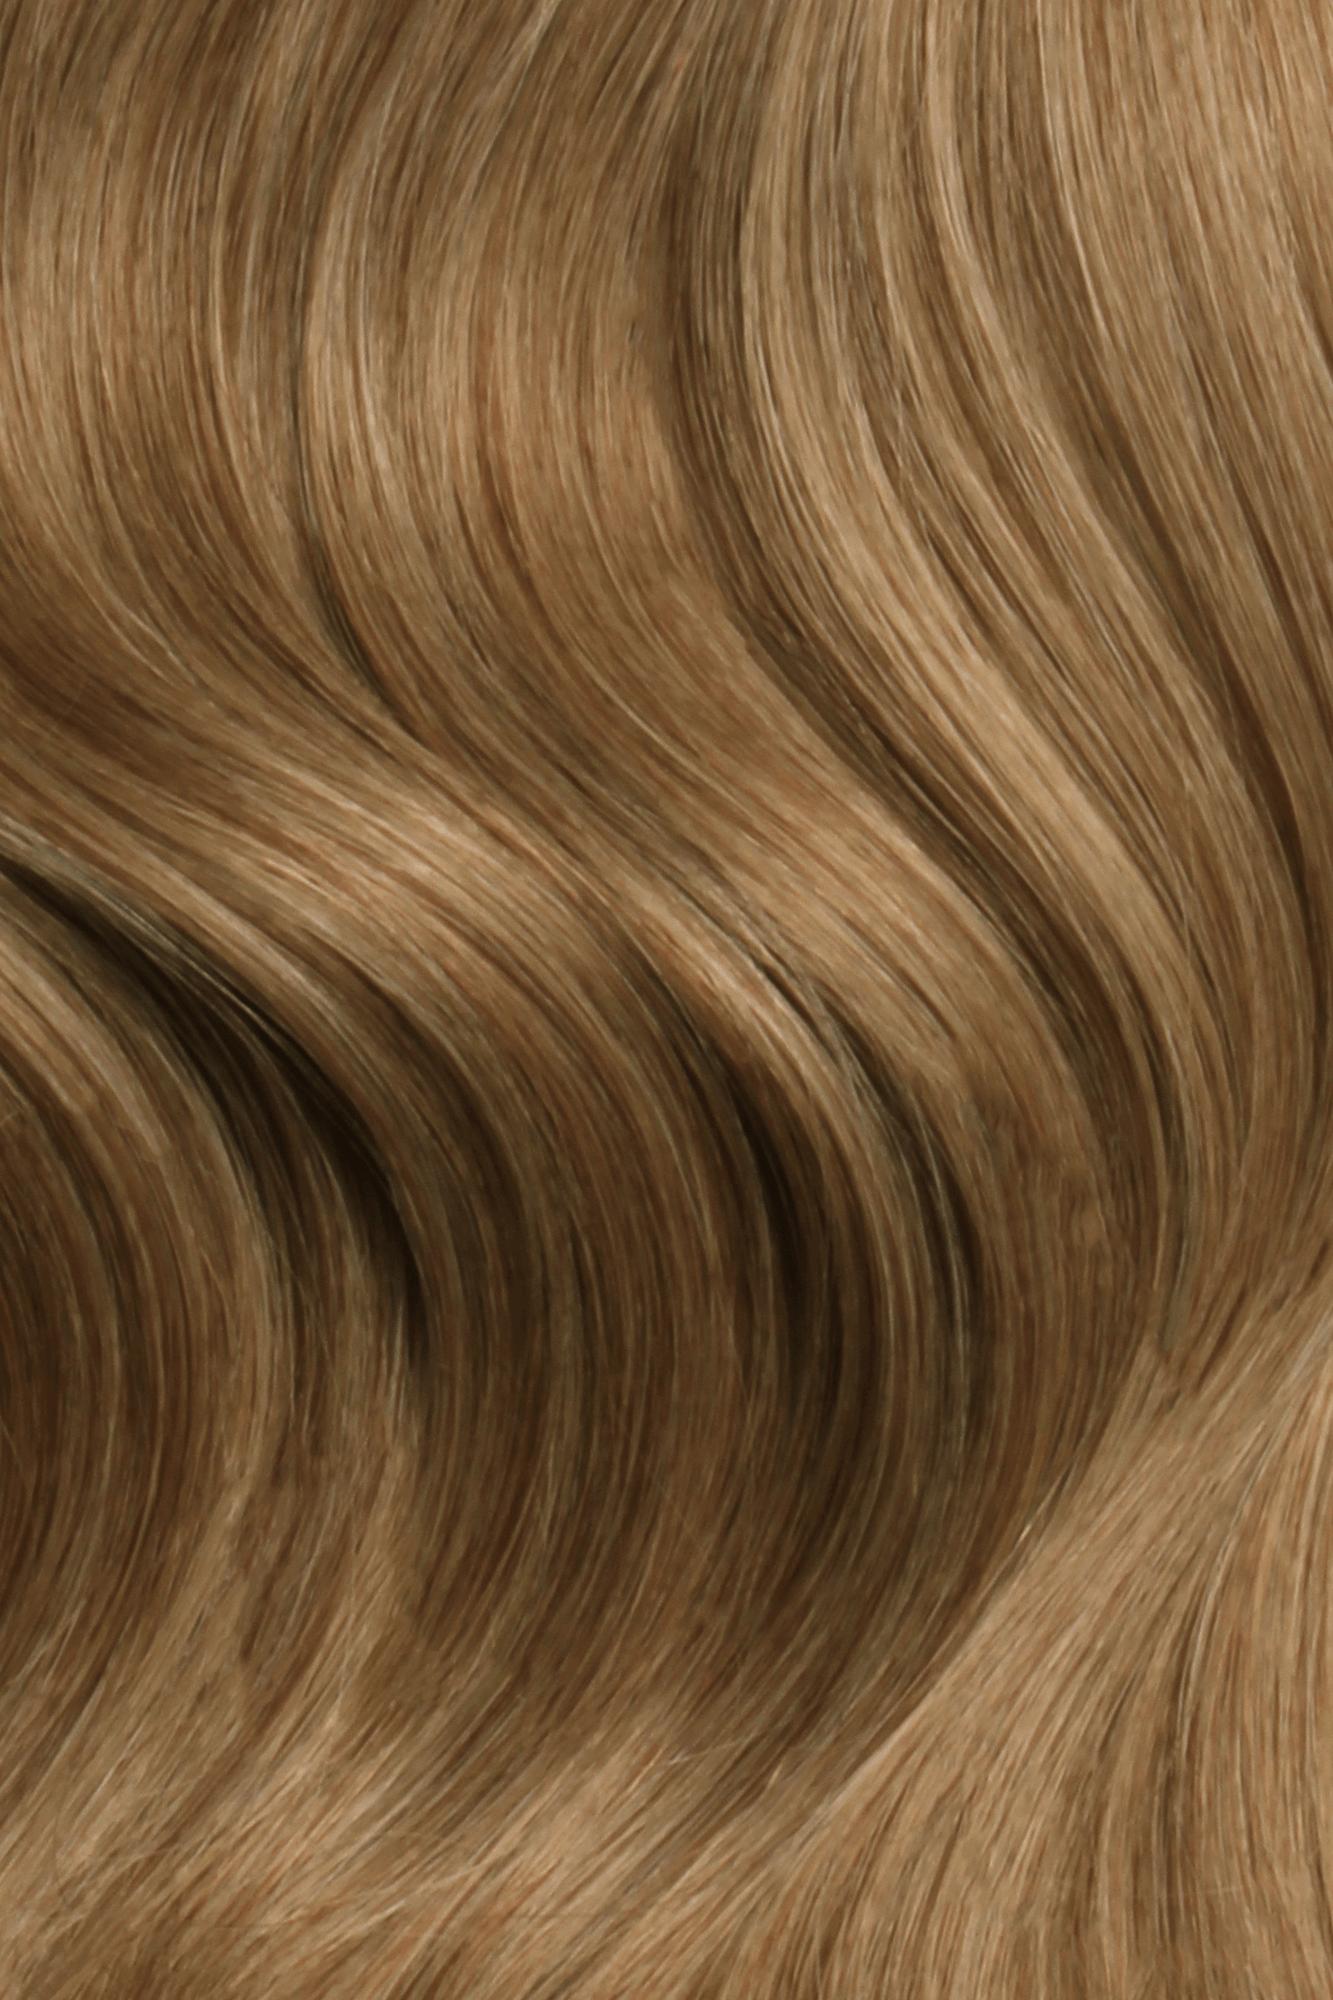 SEAMLESS® Tapes 20 Inches - SWAY Hair Extensions Chestnut-Blonde-Mix-6-24 clip-in hair extensions made of 100% Double Drawn, Remy Human Hair. SWAY SEAMLESS® Tapes, 20 inches. Lightweight, flexible, and perfect for any hairstyle.